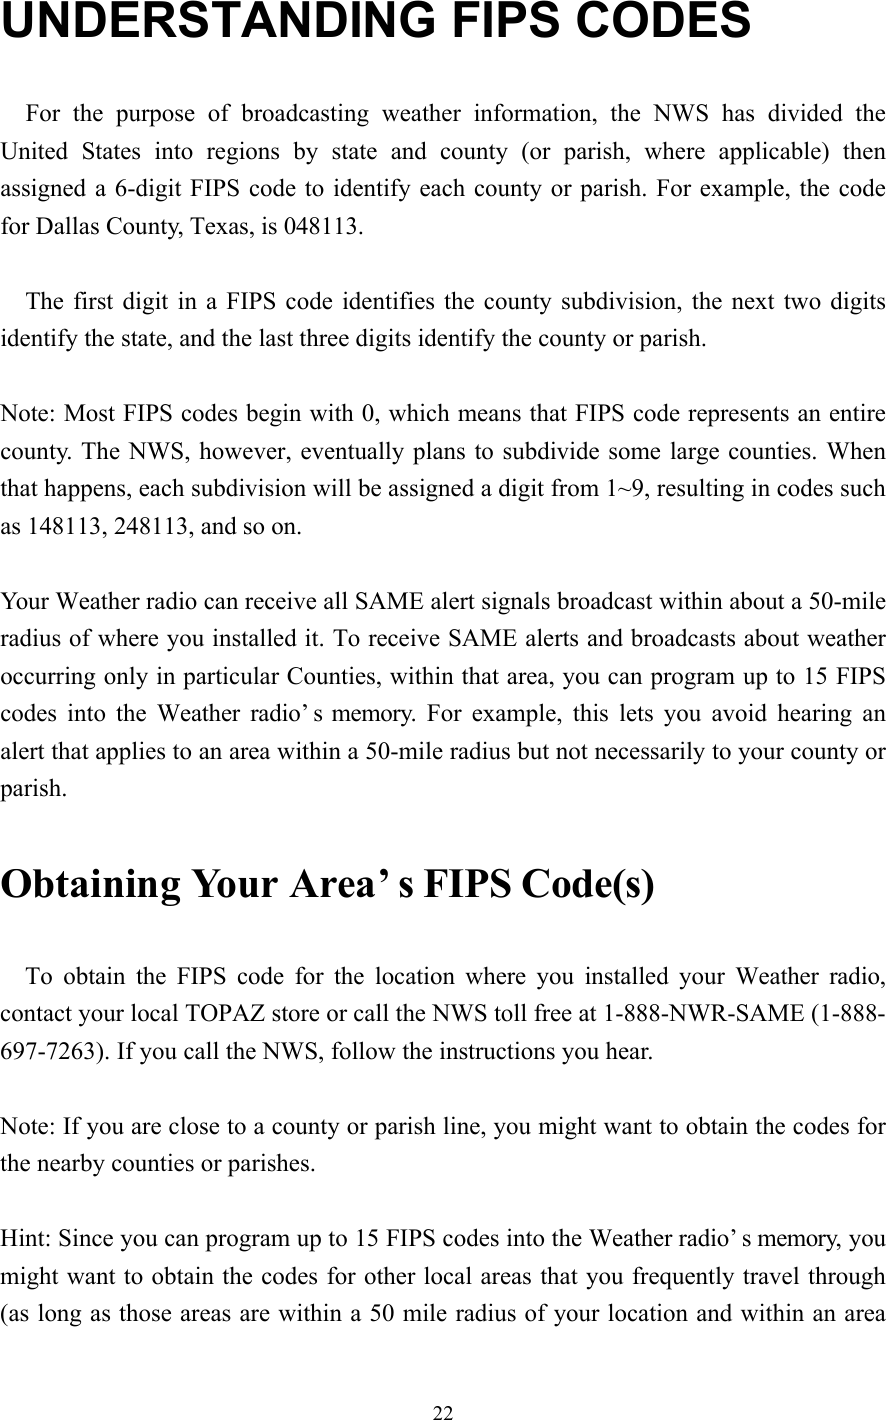 22UNDERSTANDING FIPS CODES  For the purpose of broadcasting weather information, the NWS has divided theUnited States into regions by state and county (or parish, where applicable) thenassigned a 6-digit FIPS code to identify each county or parish. For example, the codefor Dallas County, Texas, is 048113.  The first digit in a FIPS code identifies the county subdivision, the next two digitsidentify the state, and the last three digits identify the county or parish.Note: Most FIPS codes begin with 0, which means that FIPS code represents an entirecounty. The NWS, however, eventually plans to subdivide some large counties. Whenthat happens, each subdivision will be assigned a digit from 1~9, resulting in codes suchas 148113, 248113, and so on.Your Weather radio can receive all SAME alert signals broadcast within about a 50-mileradius of where you installed it. To receive SAME alerts and broadcasts about weatheroccurring only in particular Counties, within that area, you can program up to 15 FIPScodes into the Weather radio’s memory. For example, this lets you avoid hearing analert that applies to an area within a 50-mile radius but not necessarily to your county orparish.  Obtaining Your Area’s FIPS Code(s)To obtain the FIPS code for the location where you installed your Weather radio,contact your local TOPAZ store or call the NWS toll free at 1-888-NWR-SAME (1-888-697-7263). If you call the NWS, follow the instructions you hear.Note: If you are close to a county or parish line, you might want to obtain the codes forthe nearby counties or parishes.Hint: Since you can program up to 15 FIPS codes into the Weather radio’s memory, youmight want to obtain the codes for other local areas that you frequently travel through(as long as those areas are within a 50 mile radius of your location and within an area